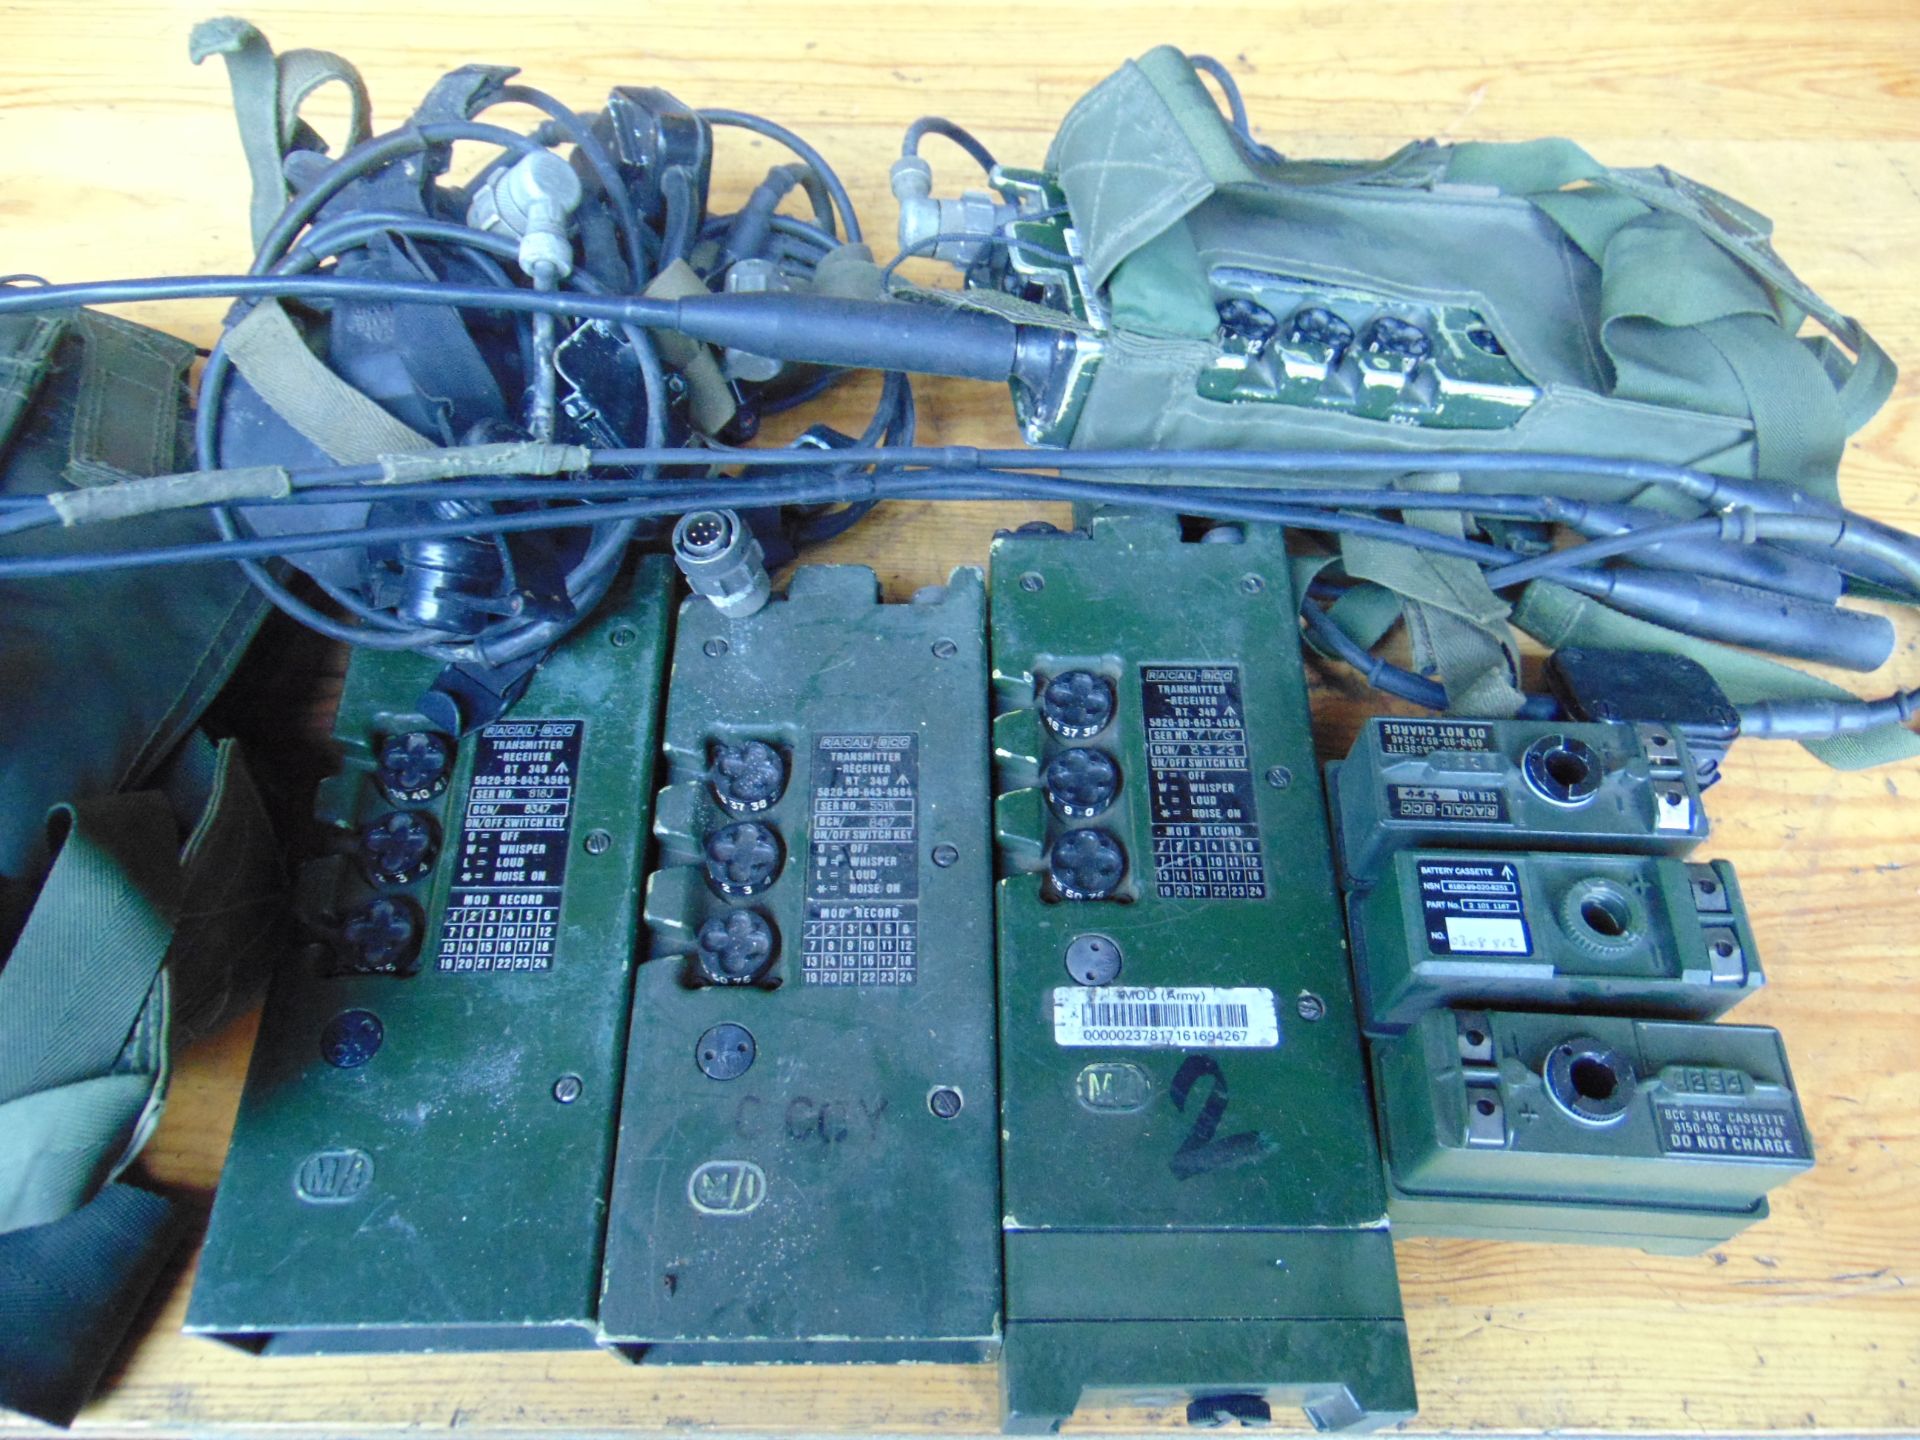 4 x UK / RT 349 Transmitter Receiver Complete as shown. - Image 4 of 6